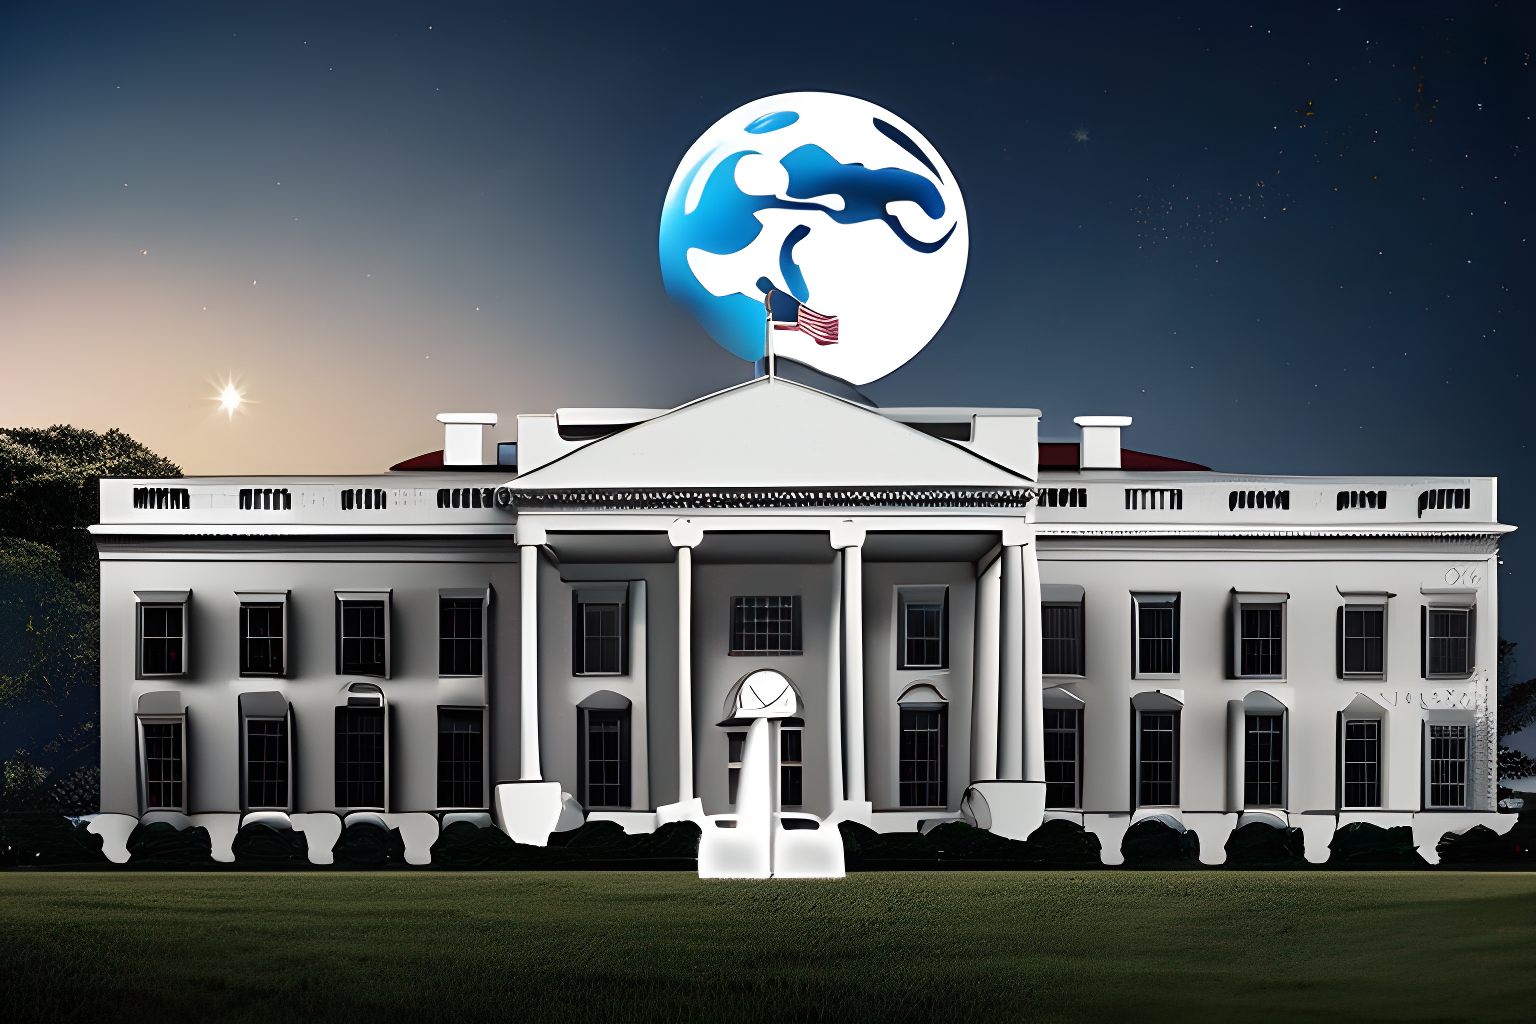 the Whitehouse on the moon.